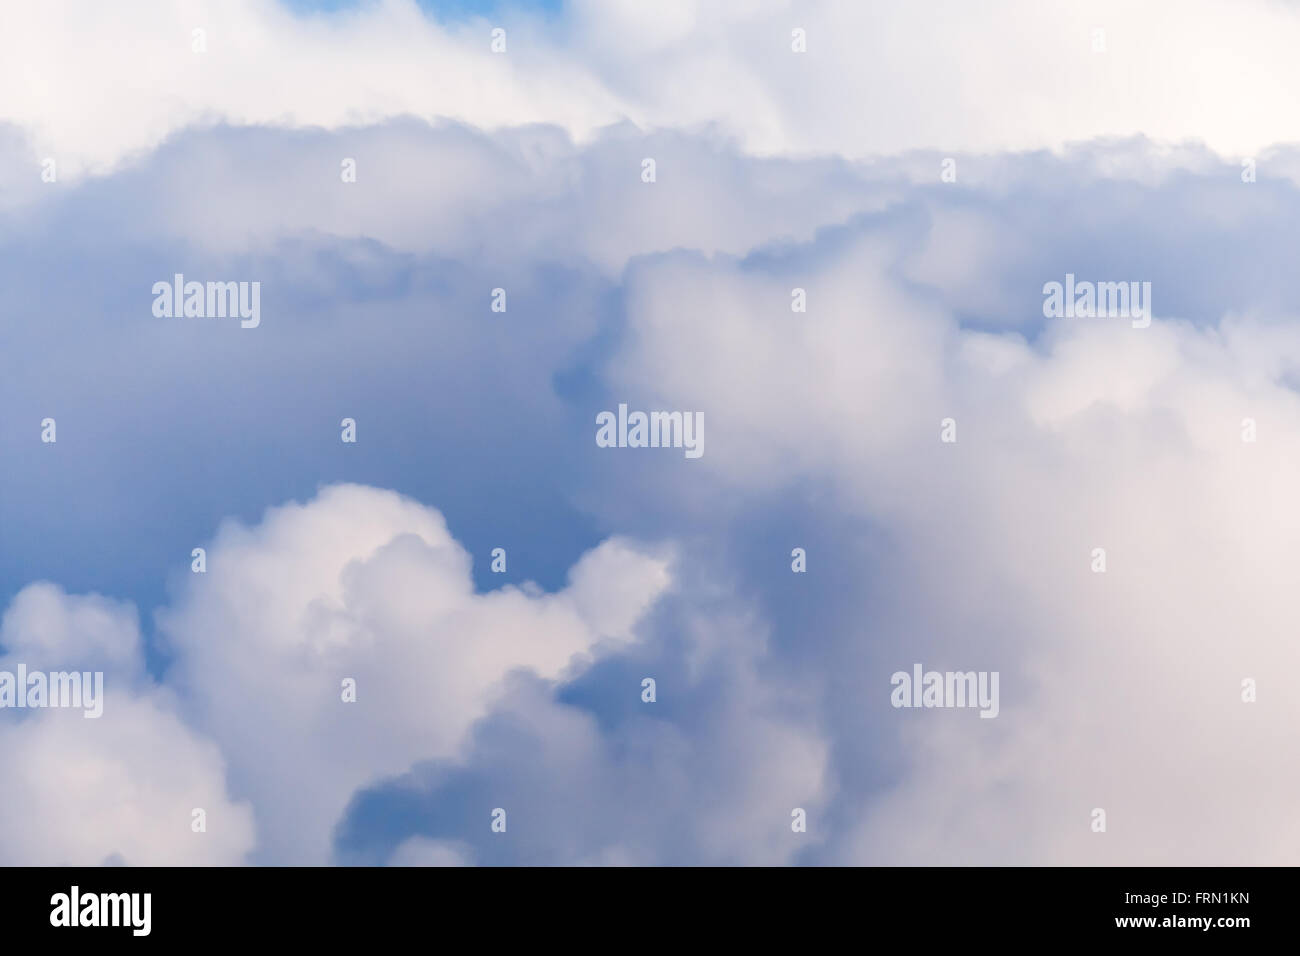 Cloud formations in sky after showers Stock Photo